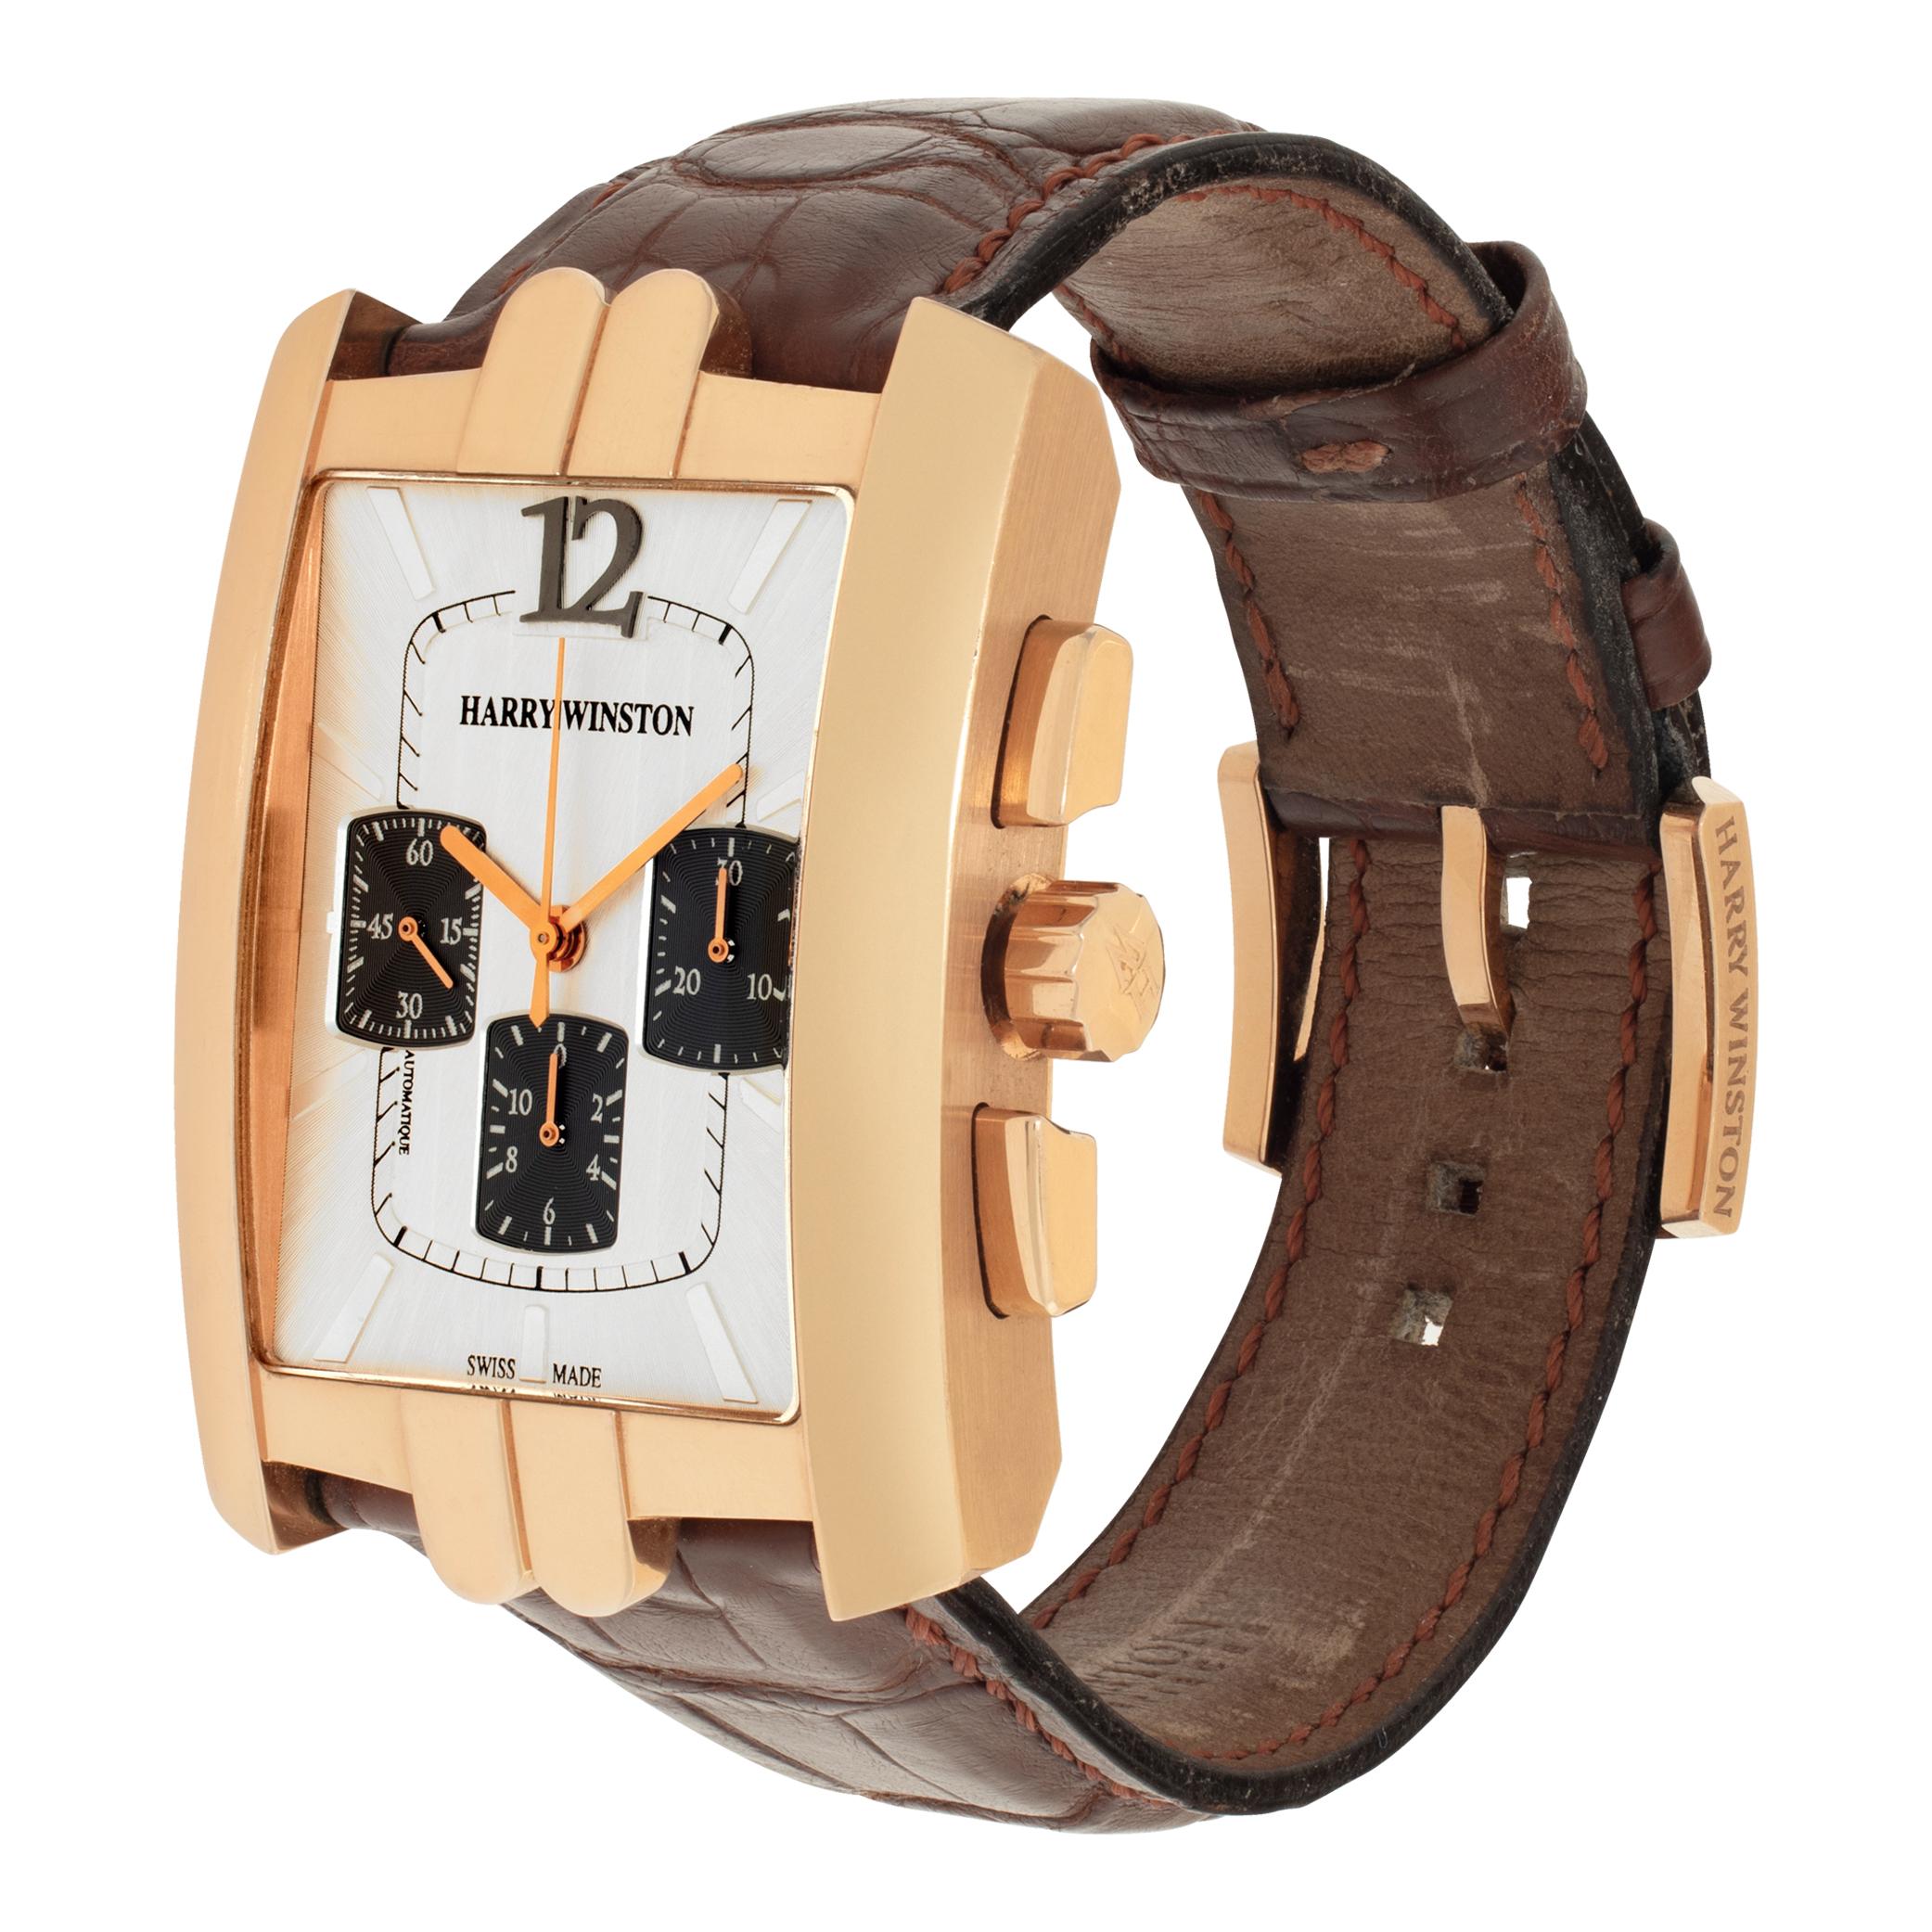 Harry Winston Avenue Chronograph in 18k rose gold on a brown crocodile strap with an 18k rose gold Harry Winston tang buckle. Auto w/ subseconds and chronograph. 43mm (lug to lug) by 32mm long. Ref 330/MCA. Fine Pre-owned Harry Winston Watch.

